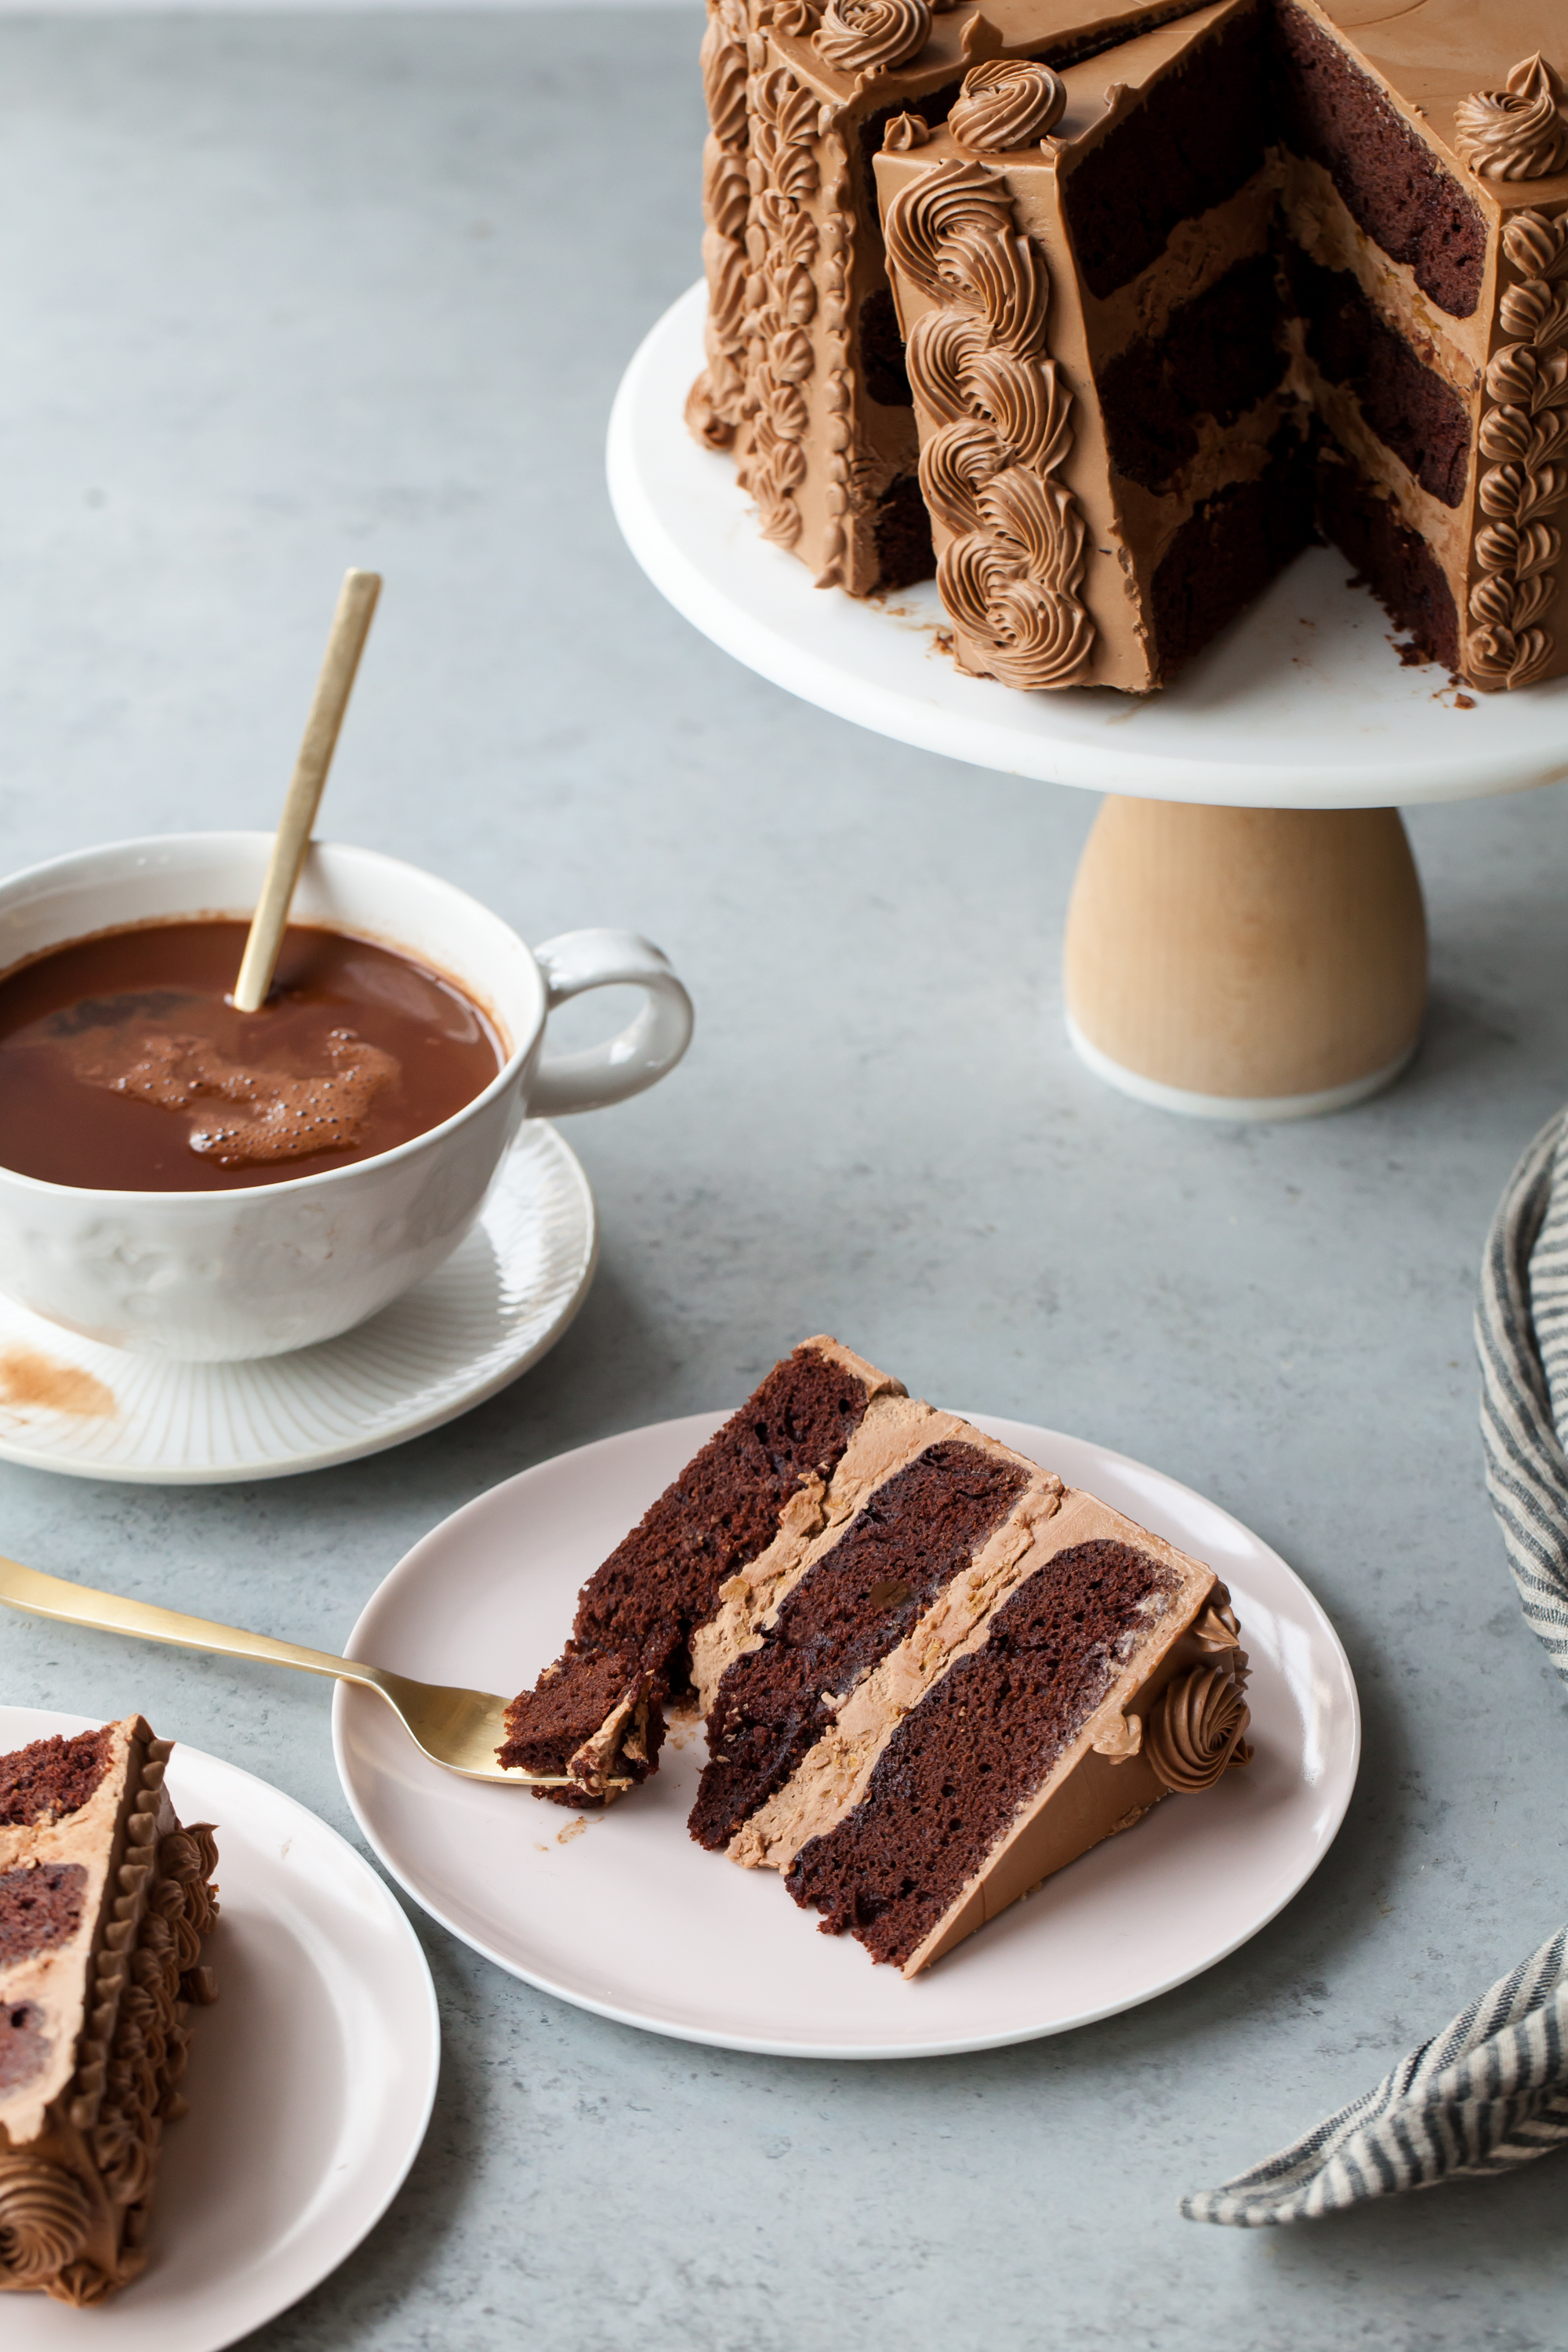 Spiced Chocolate Toffee Crunch Cake